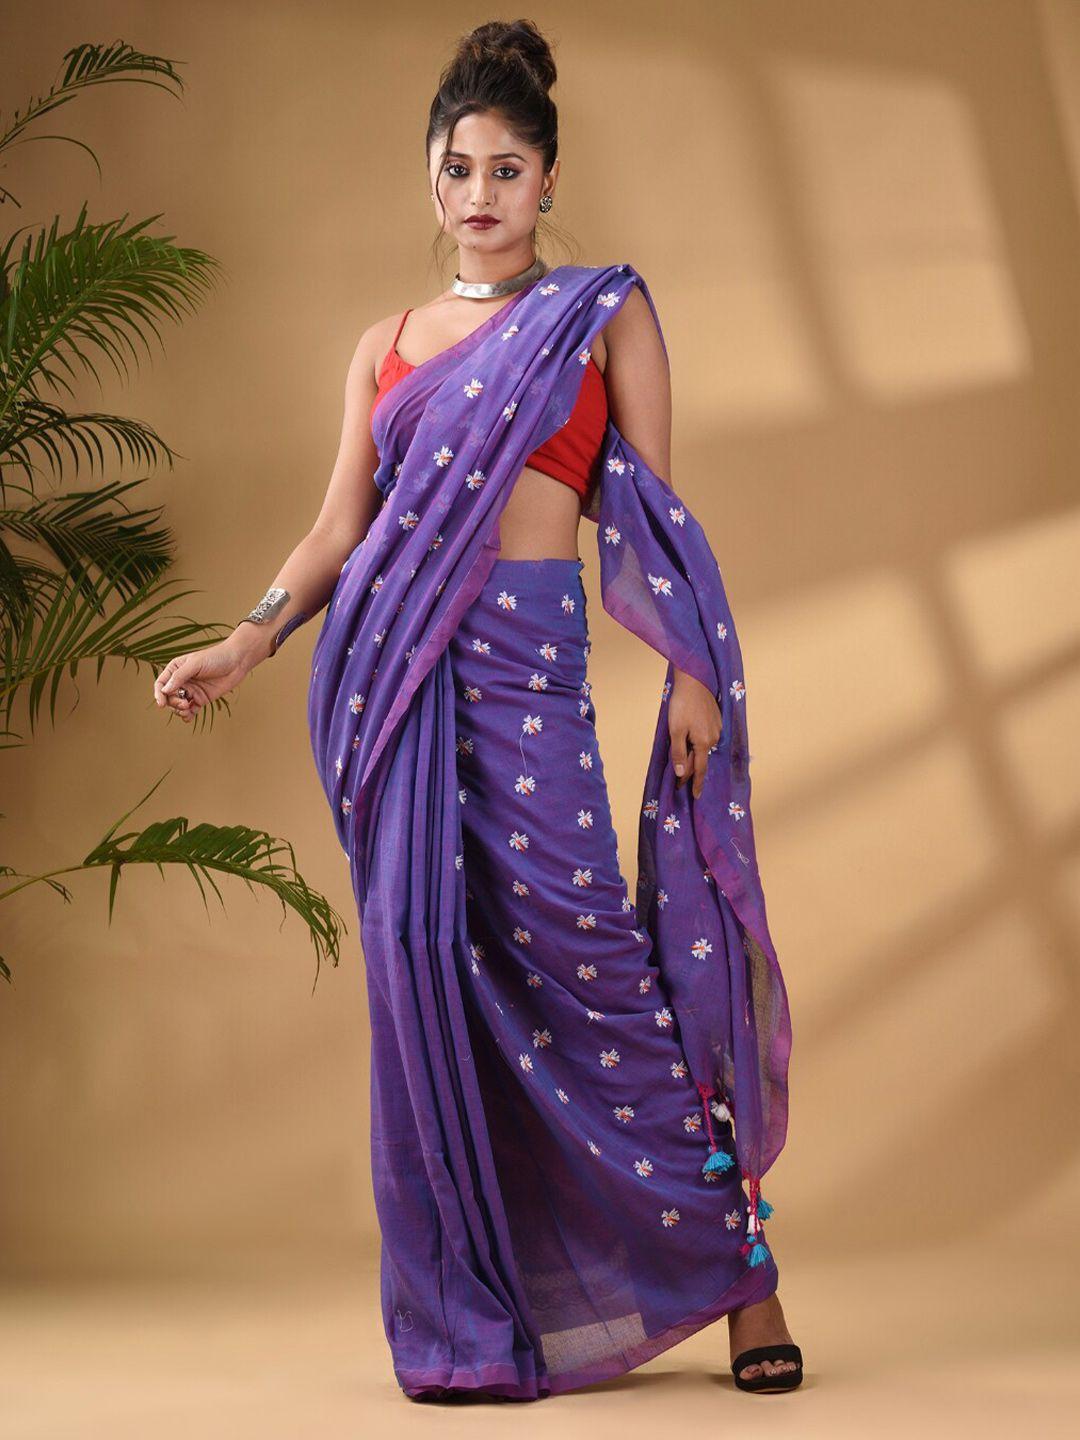 arhi floral embroidered pure cotton saree